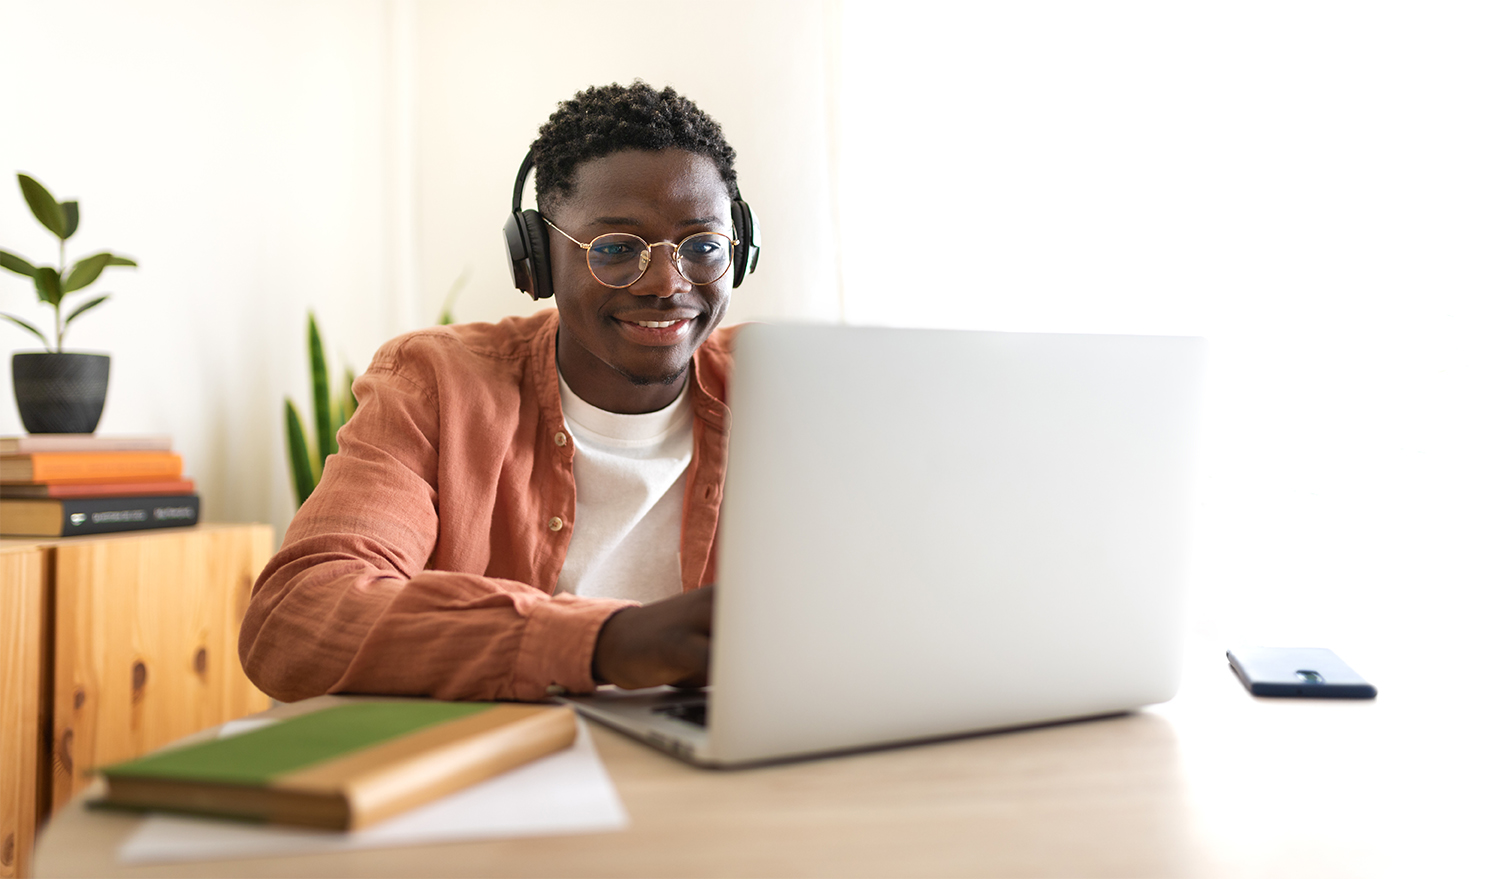 A smiling young man wearing glasses and headphones as he looks at a laptop.